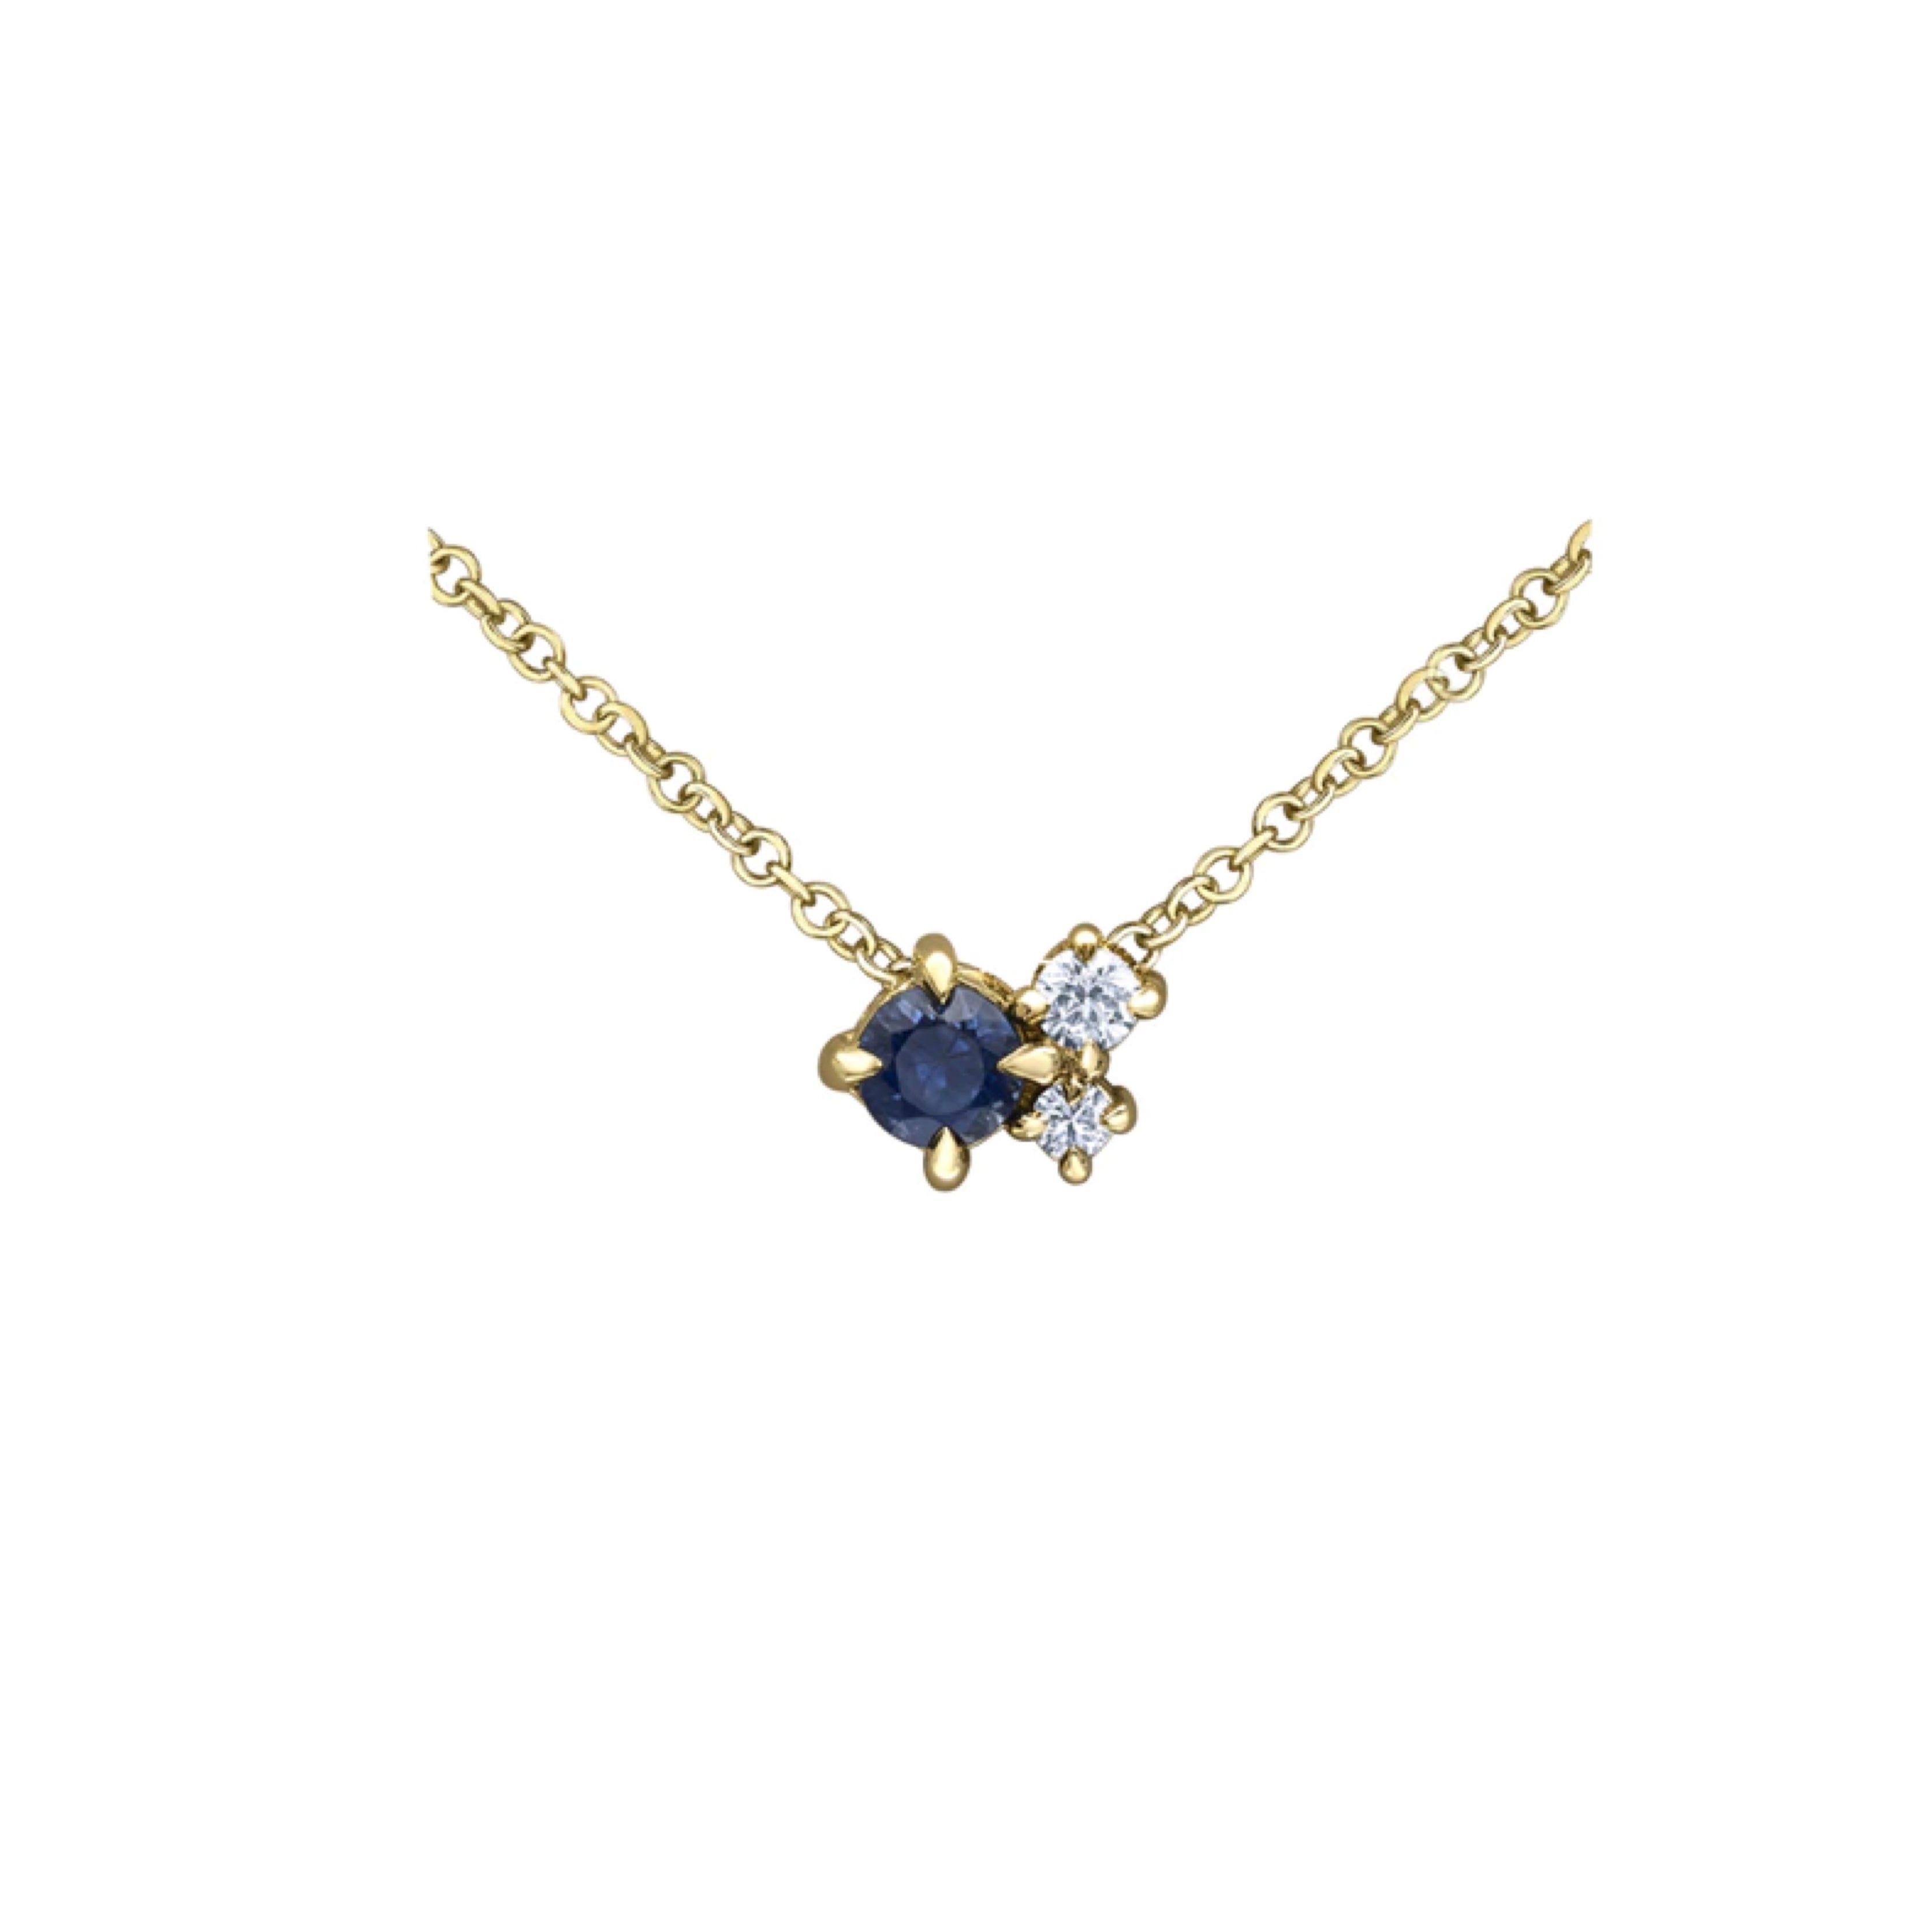 Crafted in yellow 14KT Canadian Certified Gold, this necklace features a sapphire and two round brilliant cut Canadian diamonds.